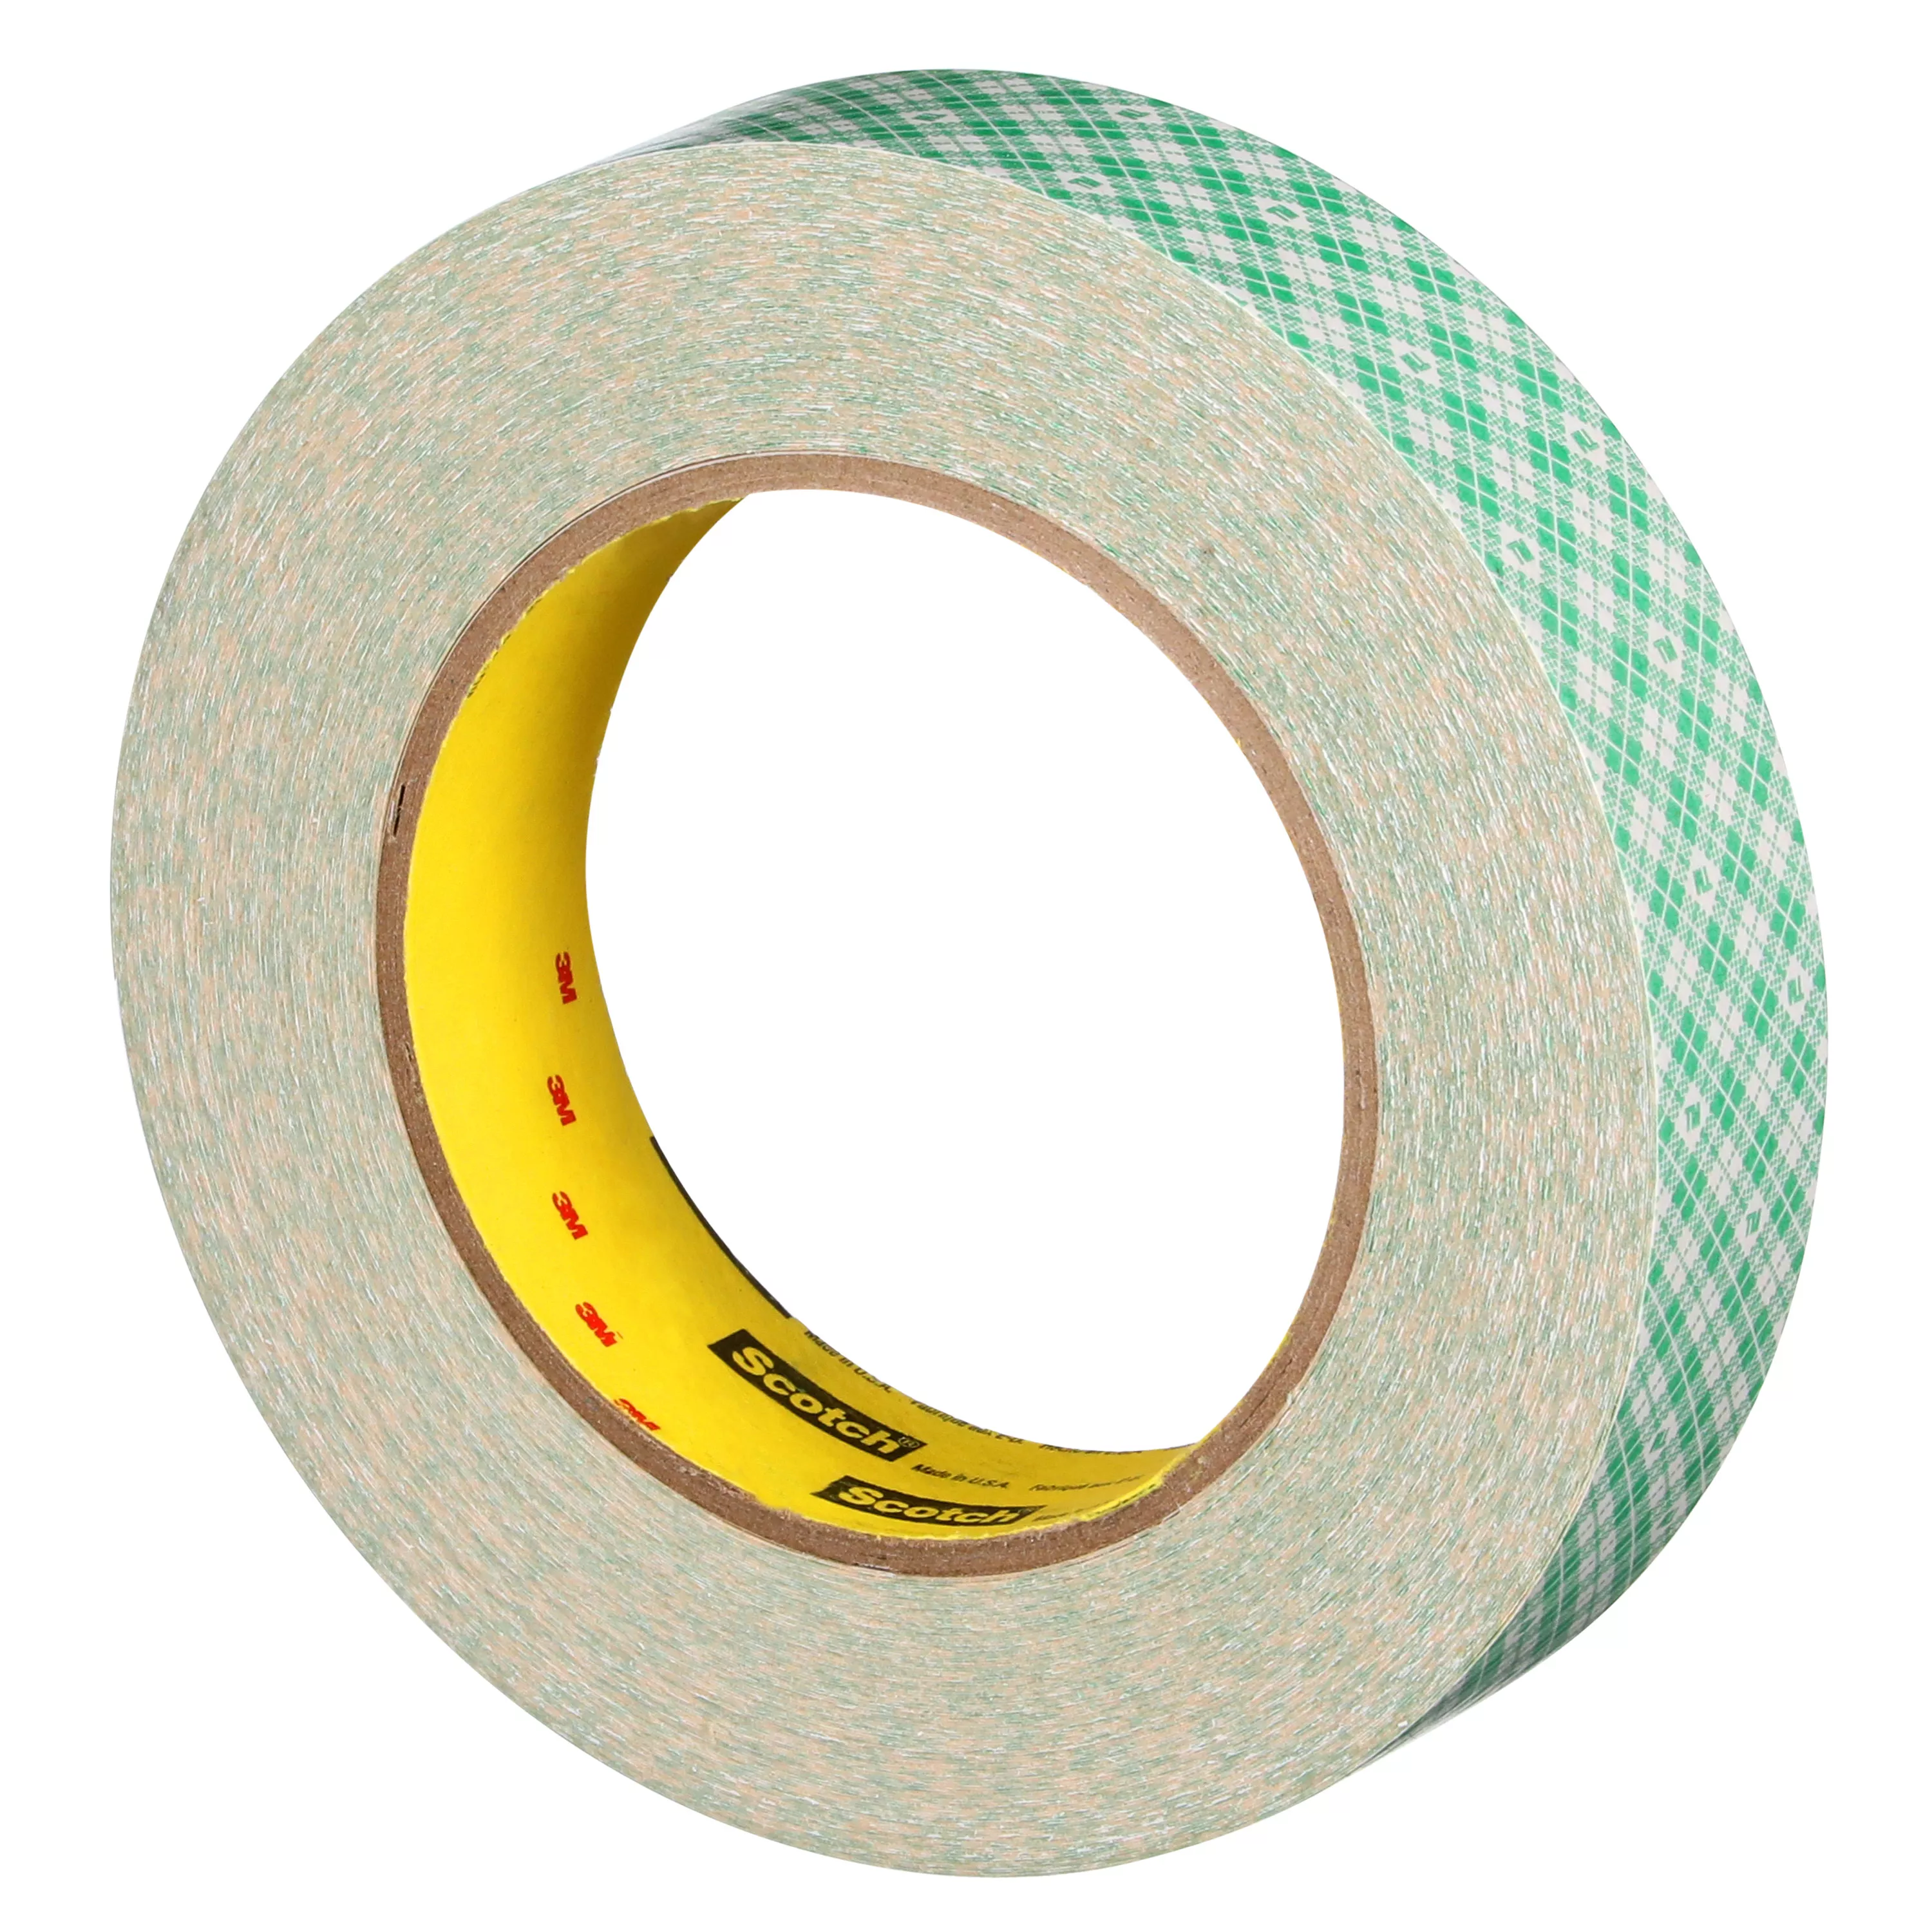 Product Number 410M | 3M™ Double Coated Paper Tape 410M